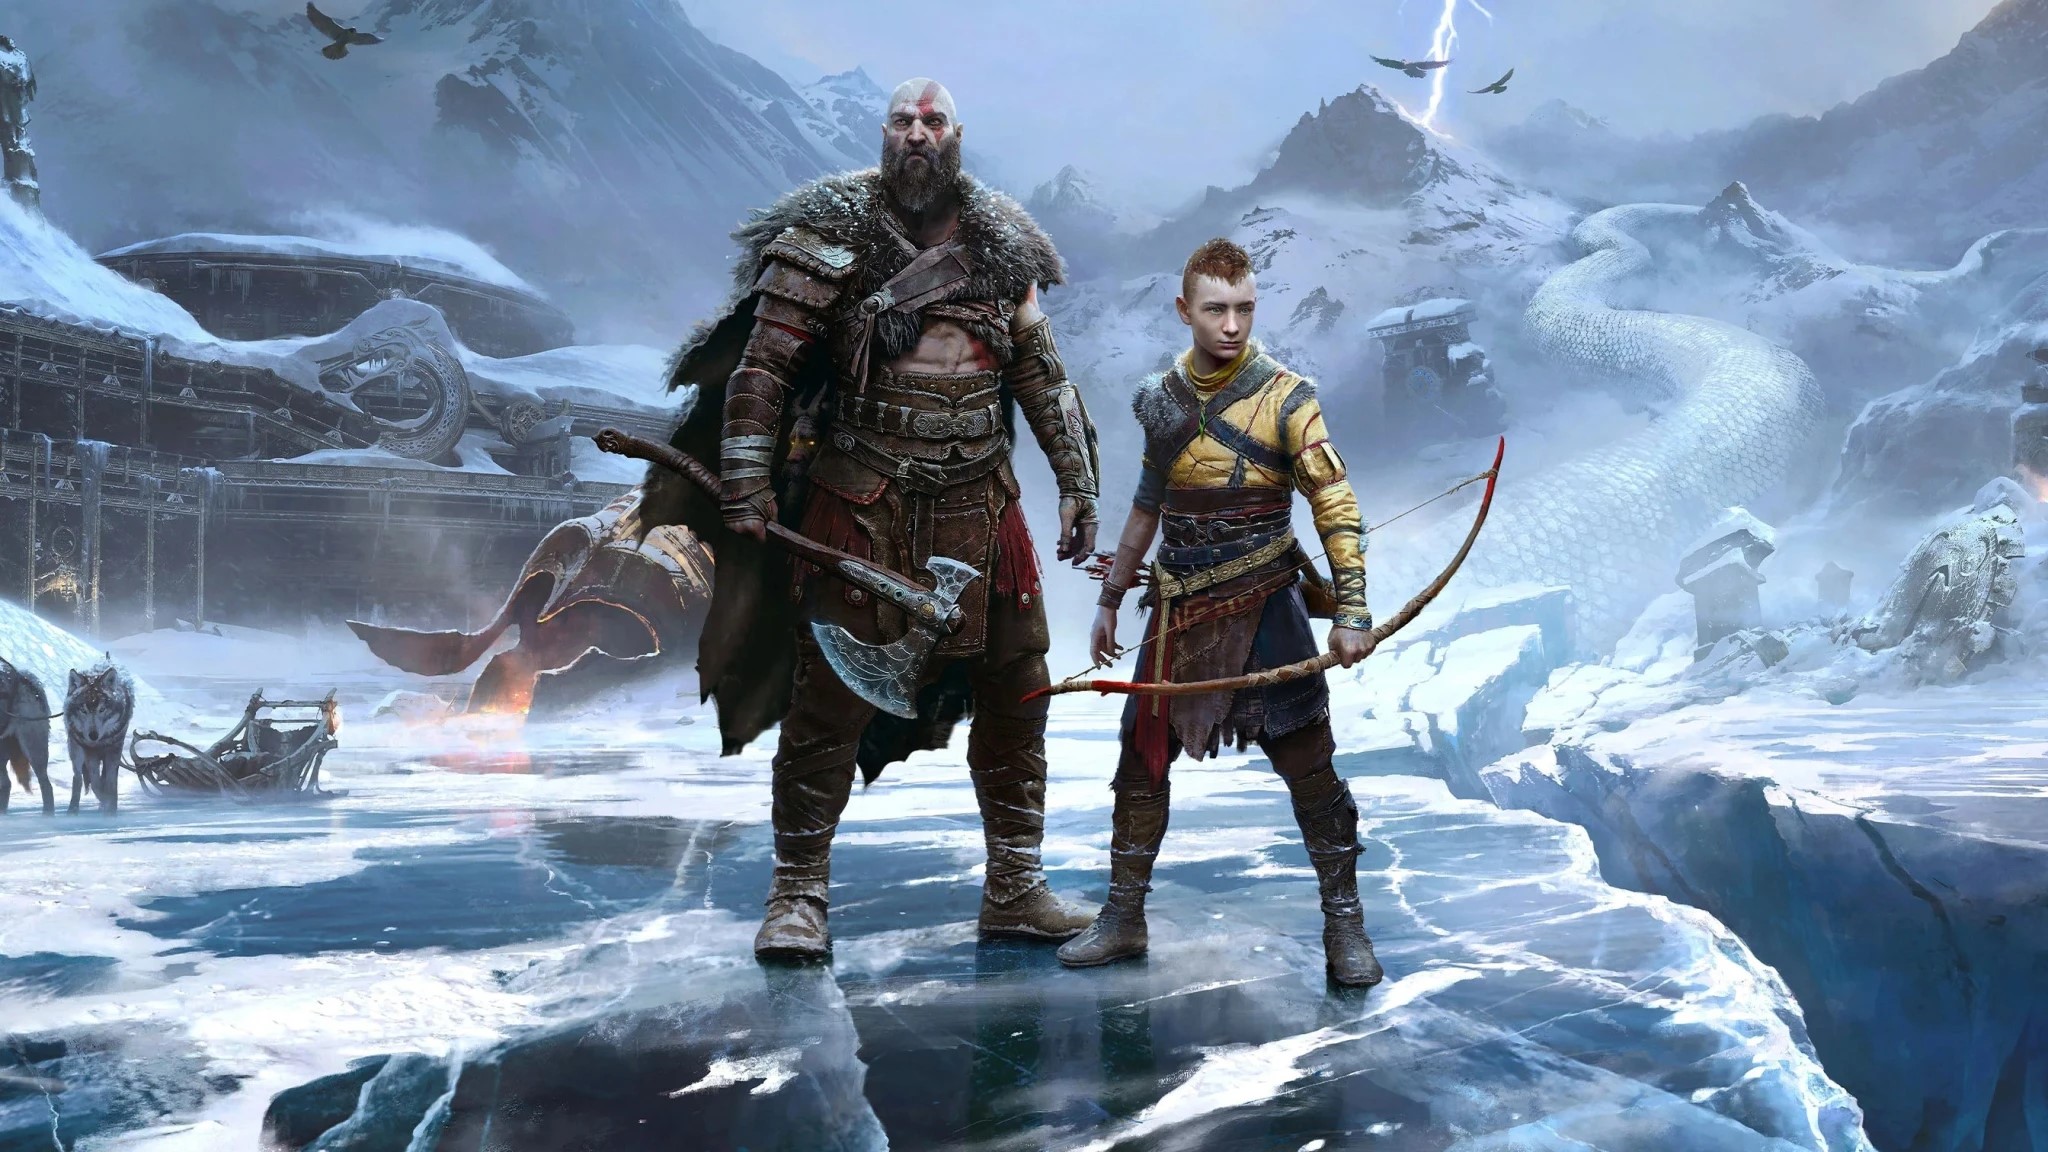 God of War Ragnarök Early Reviews - The game received a score of 94 out of 100 on Metacritic and OpenCritic